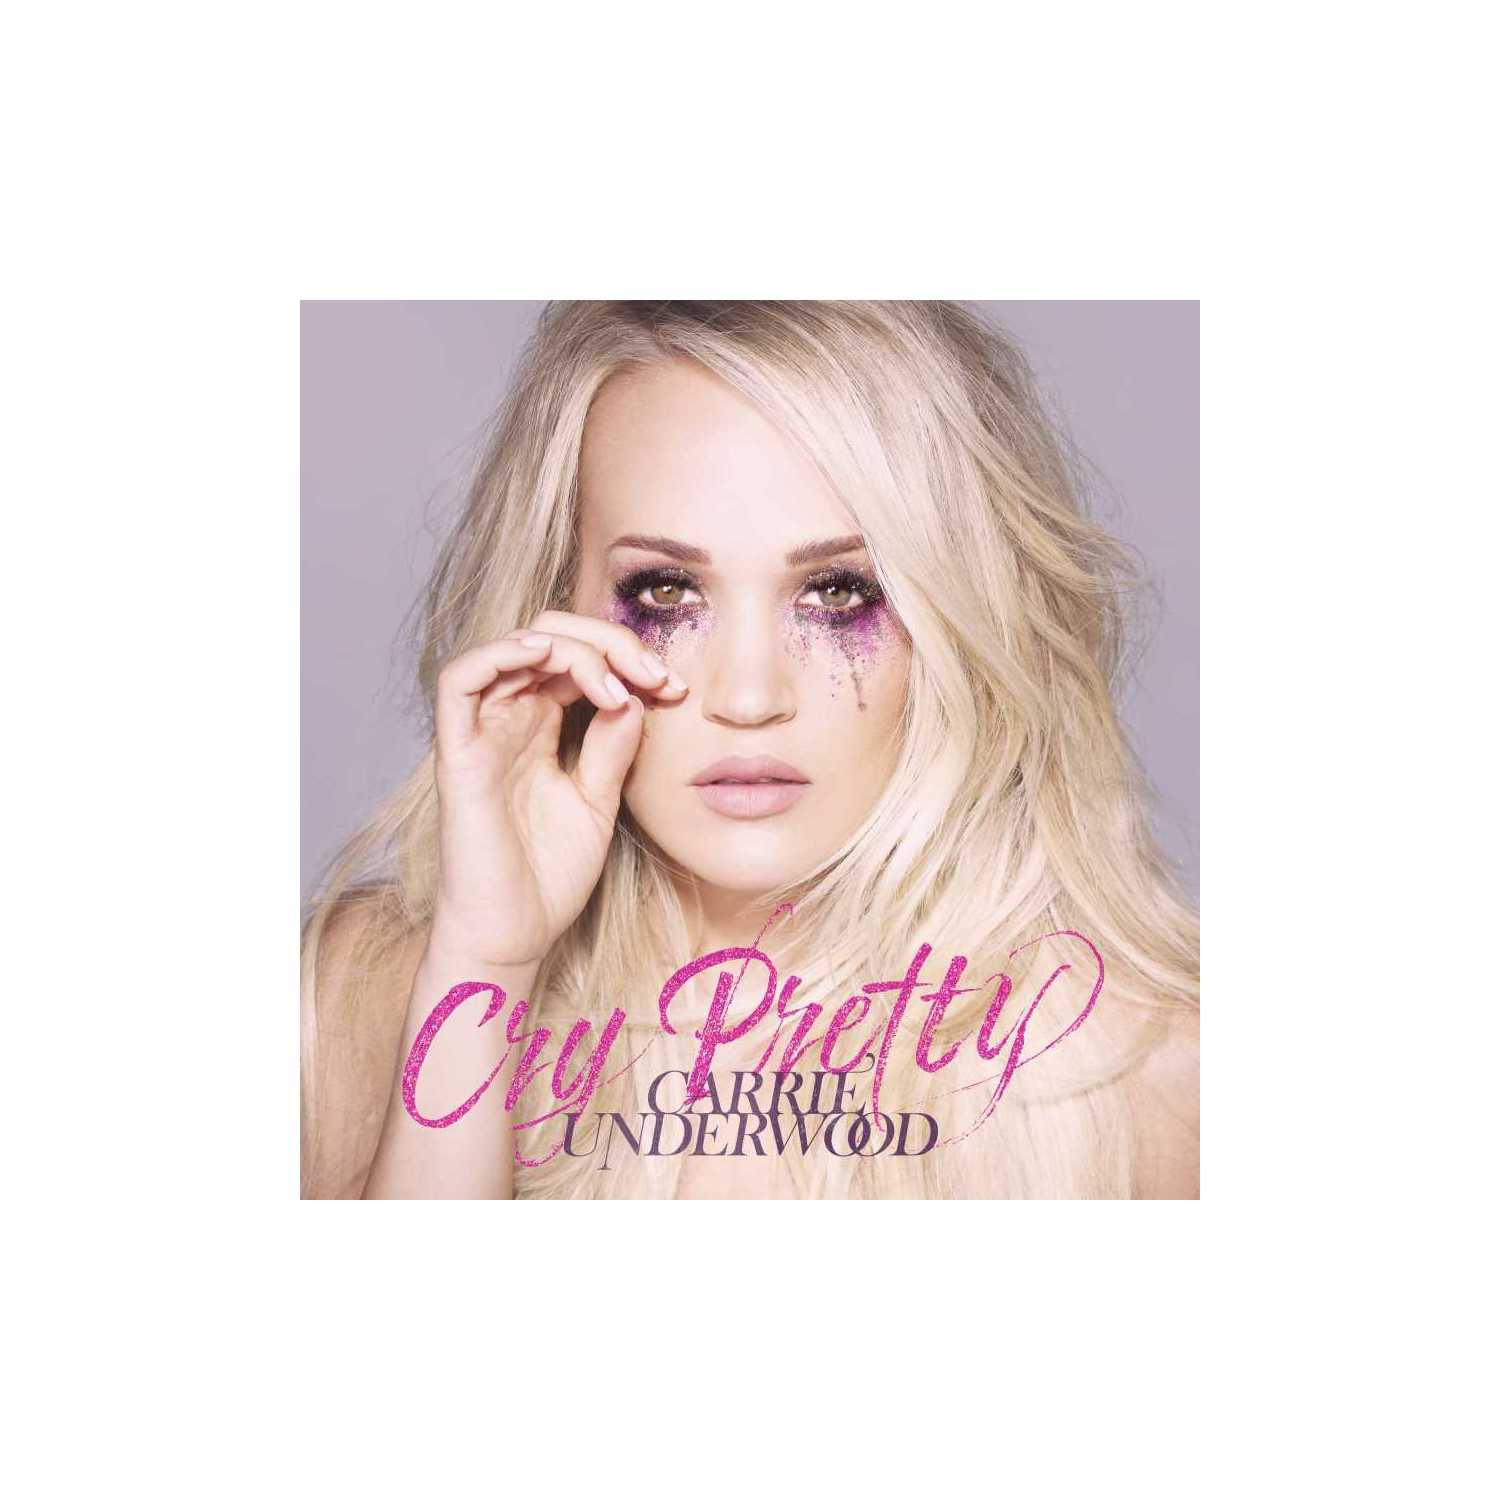 CRY PRETTY -- UNDERWOOD CARRIE